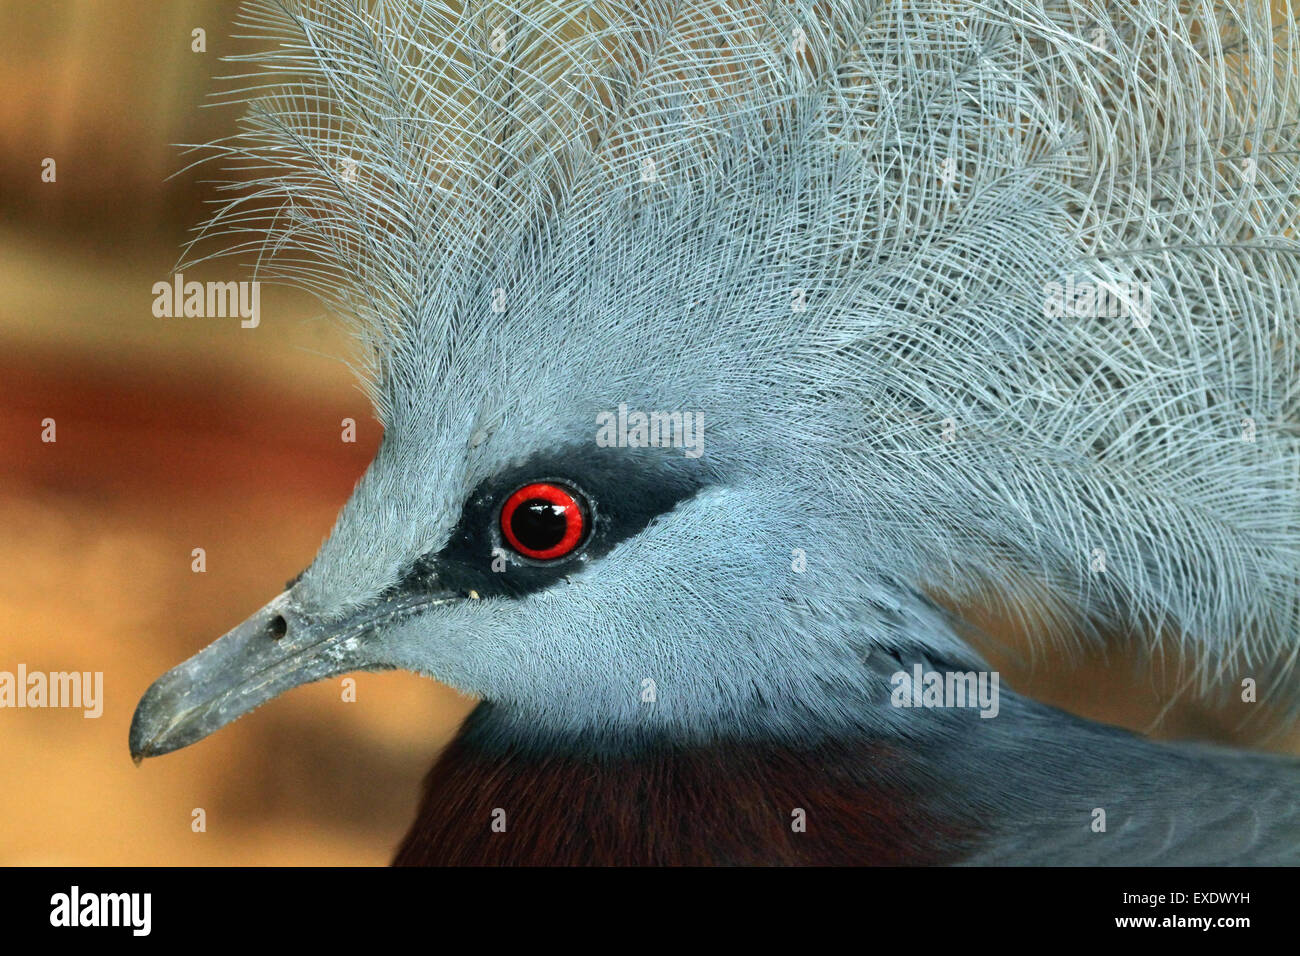 Southern crowned pigeon (Goura scheepmakeri) at Liberec Zoo in North Bohemia, Czech Republic. Stock Photo